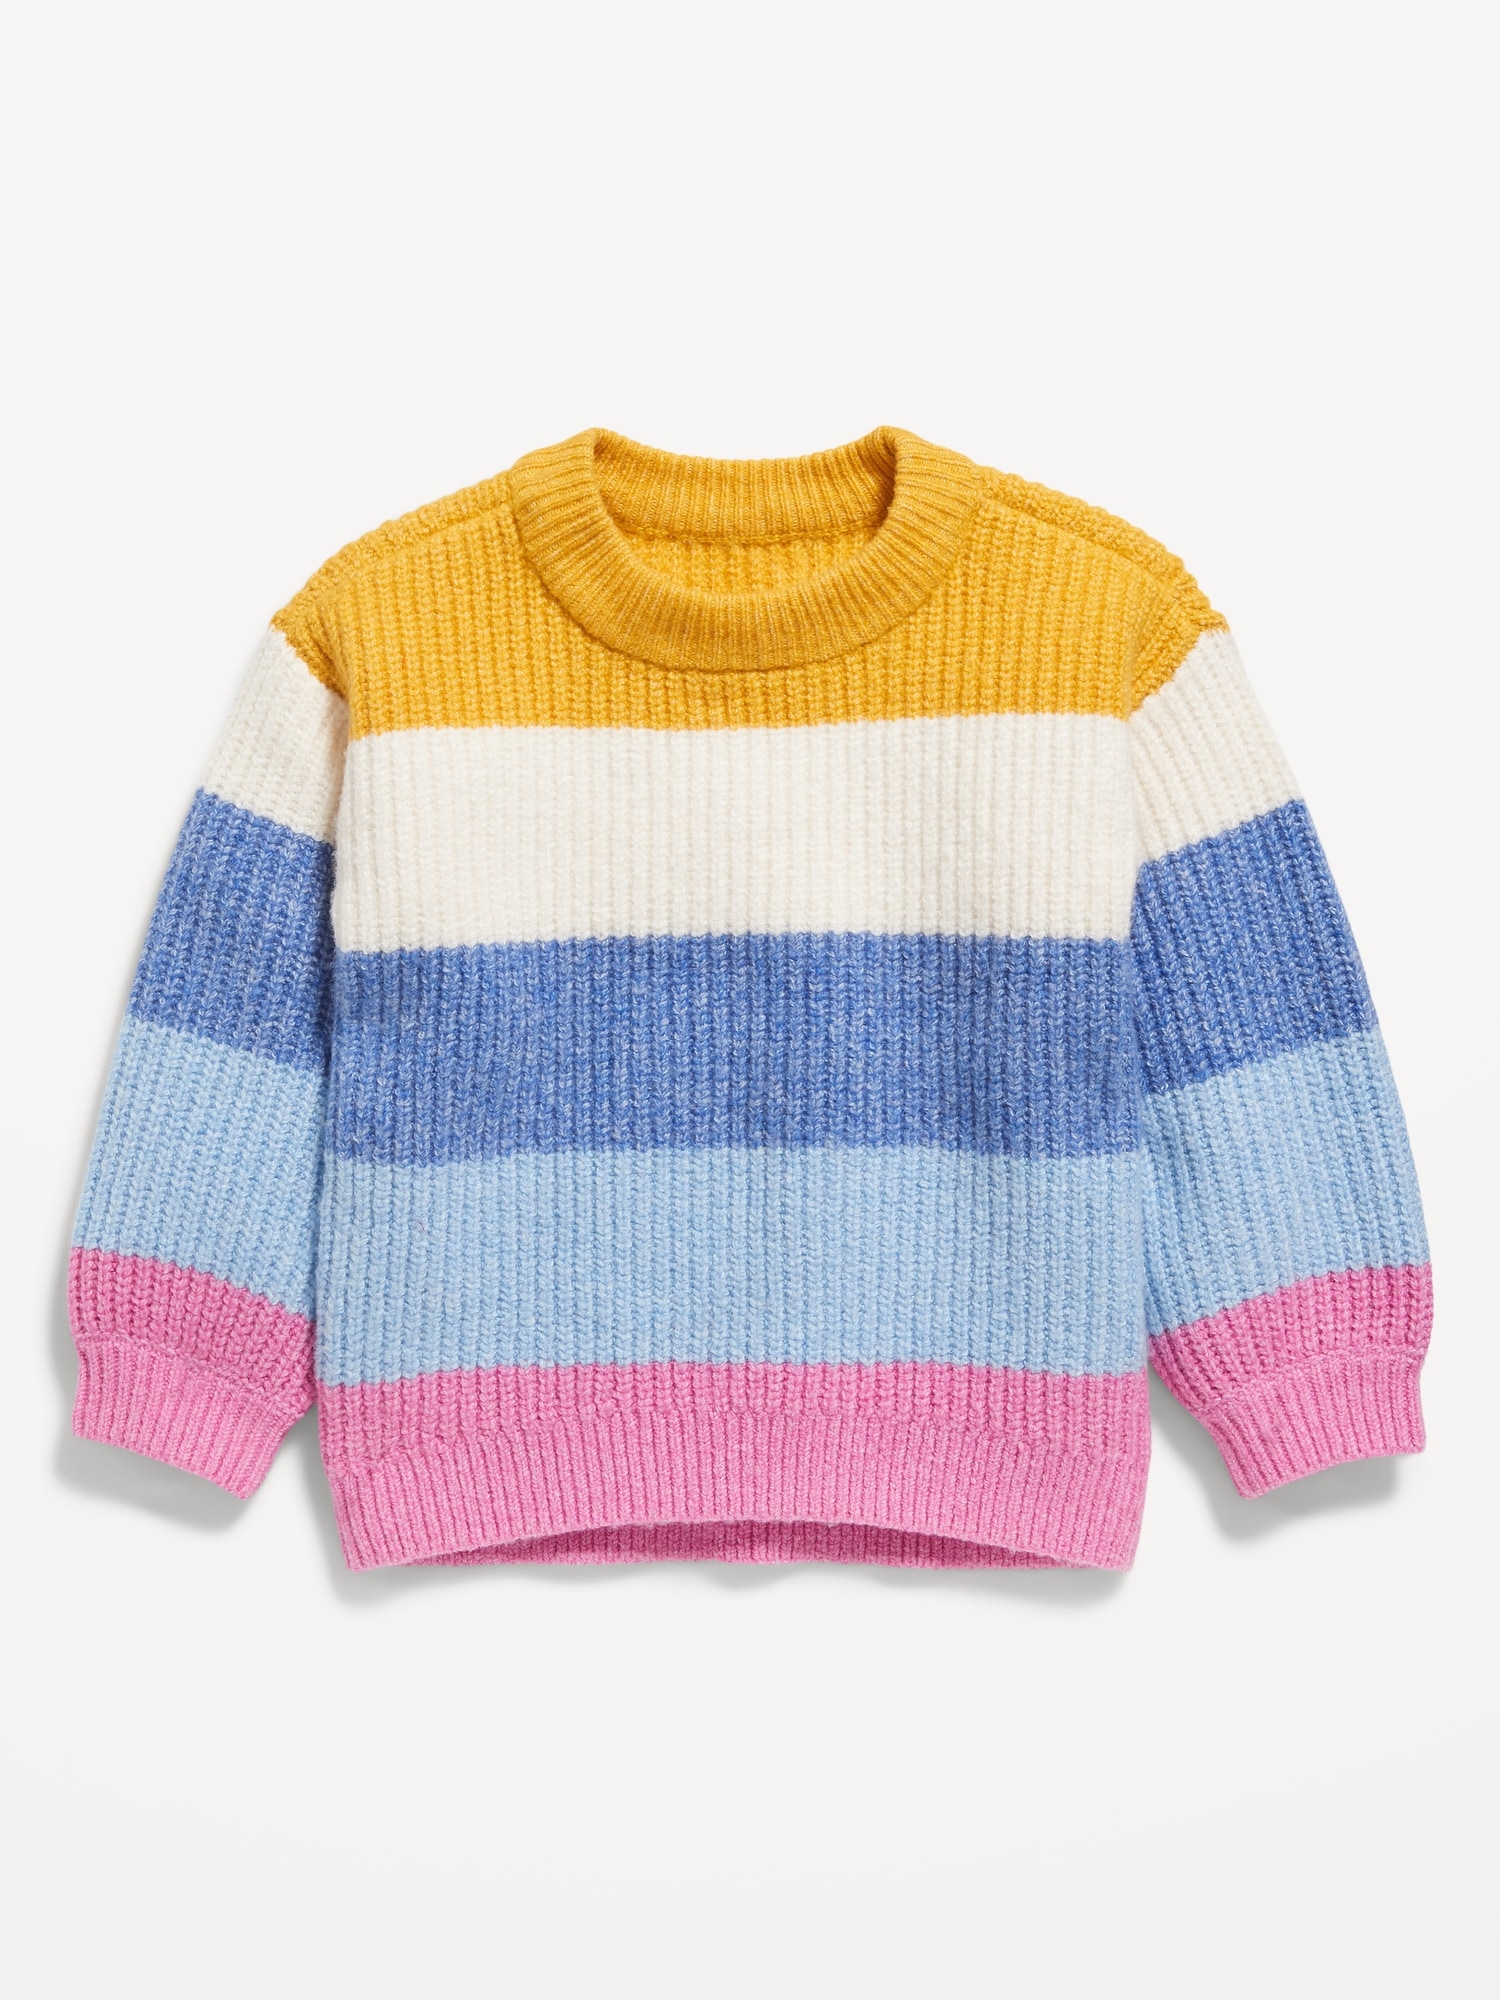 Striped Pullover Sweater for Toddler Girls